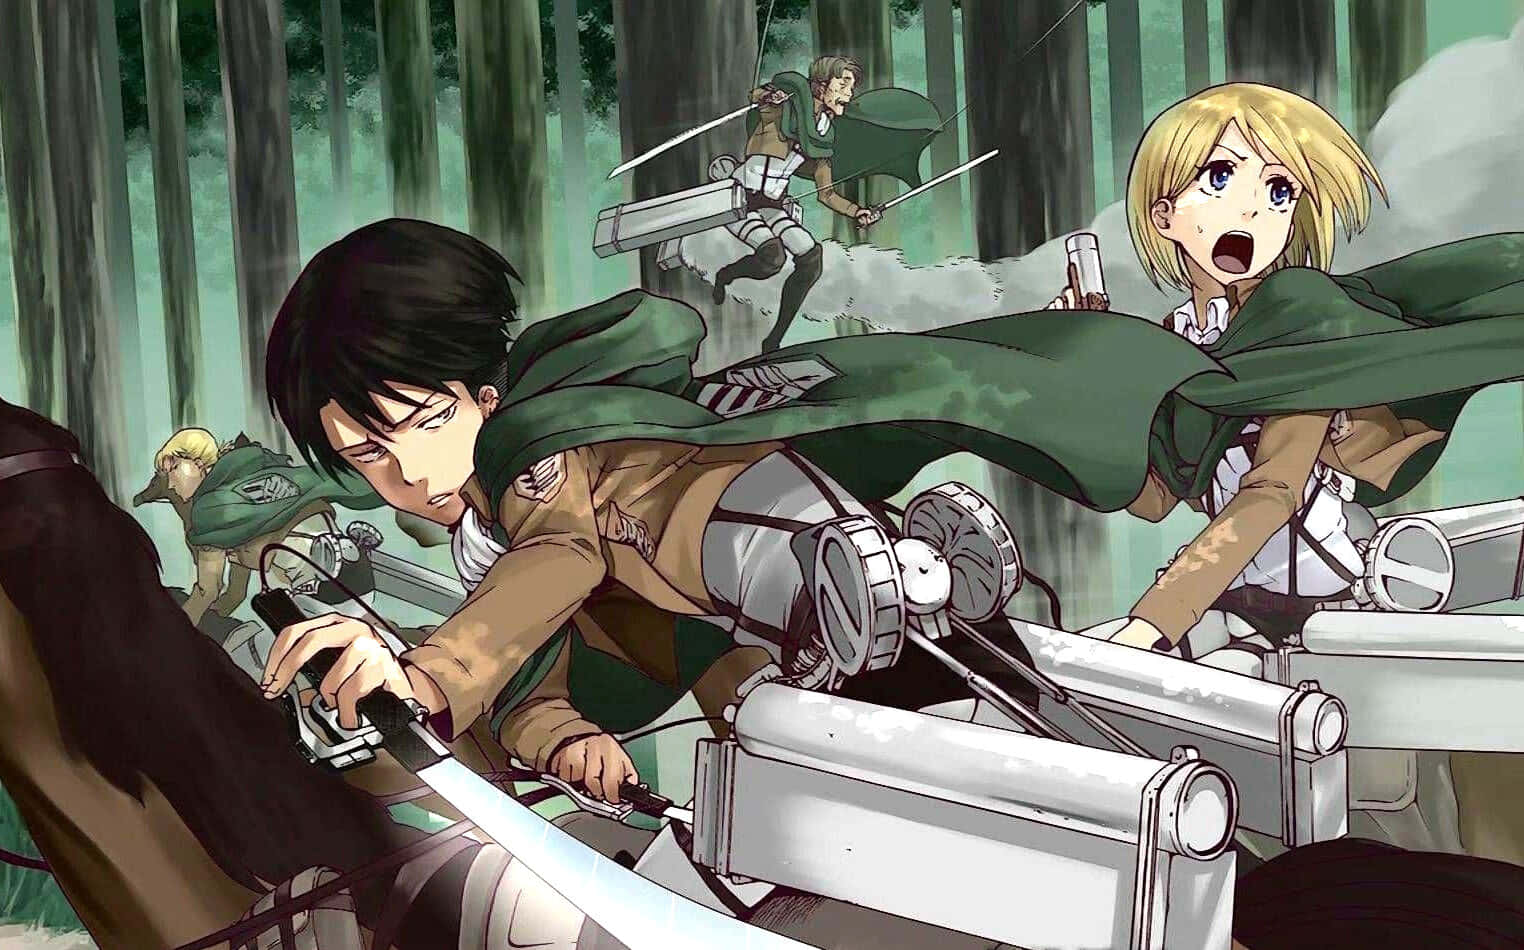 Humanity rises against overwhelming odds in the fantasy world of Attack on Titan